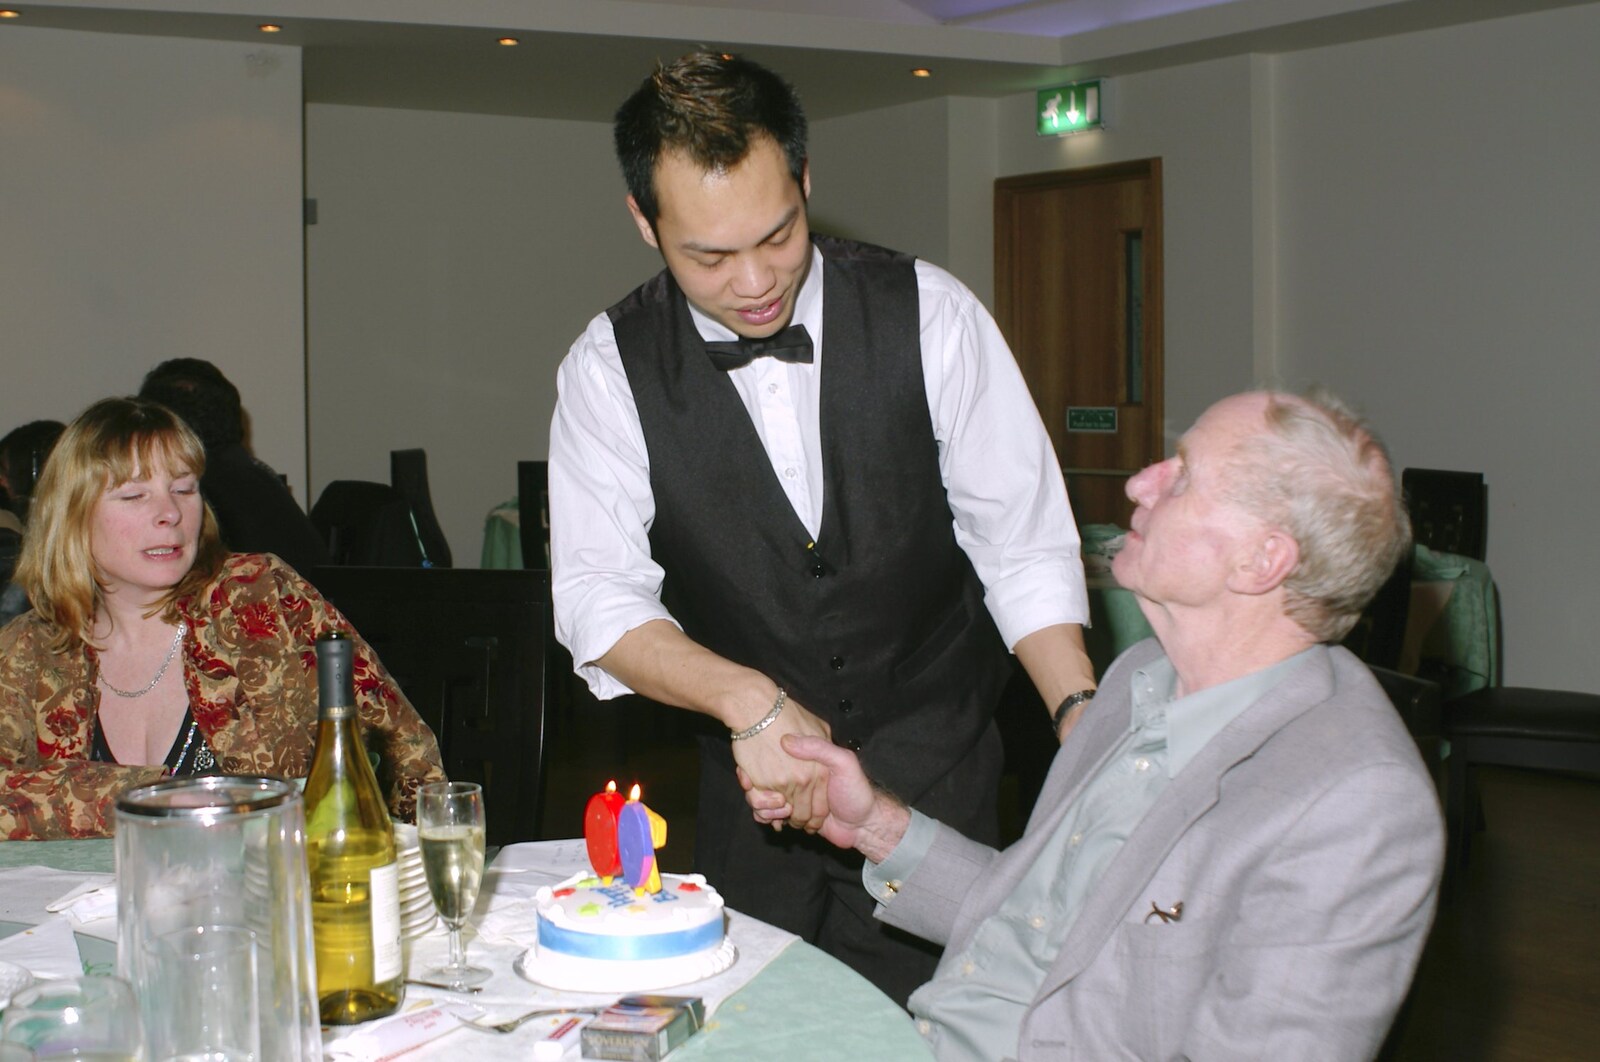 The Old Man's 70th Birthday, Pontefract, West Yorkshire - 29th January 2005: The old man gets a cake and a handshake